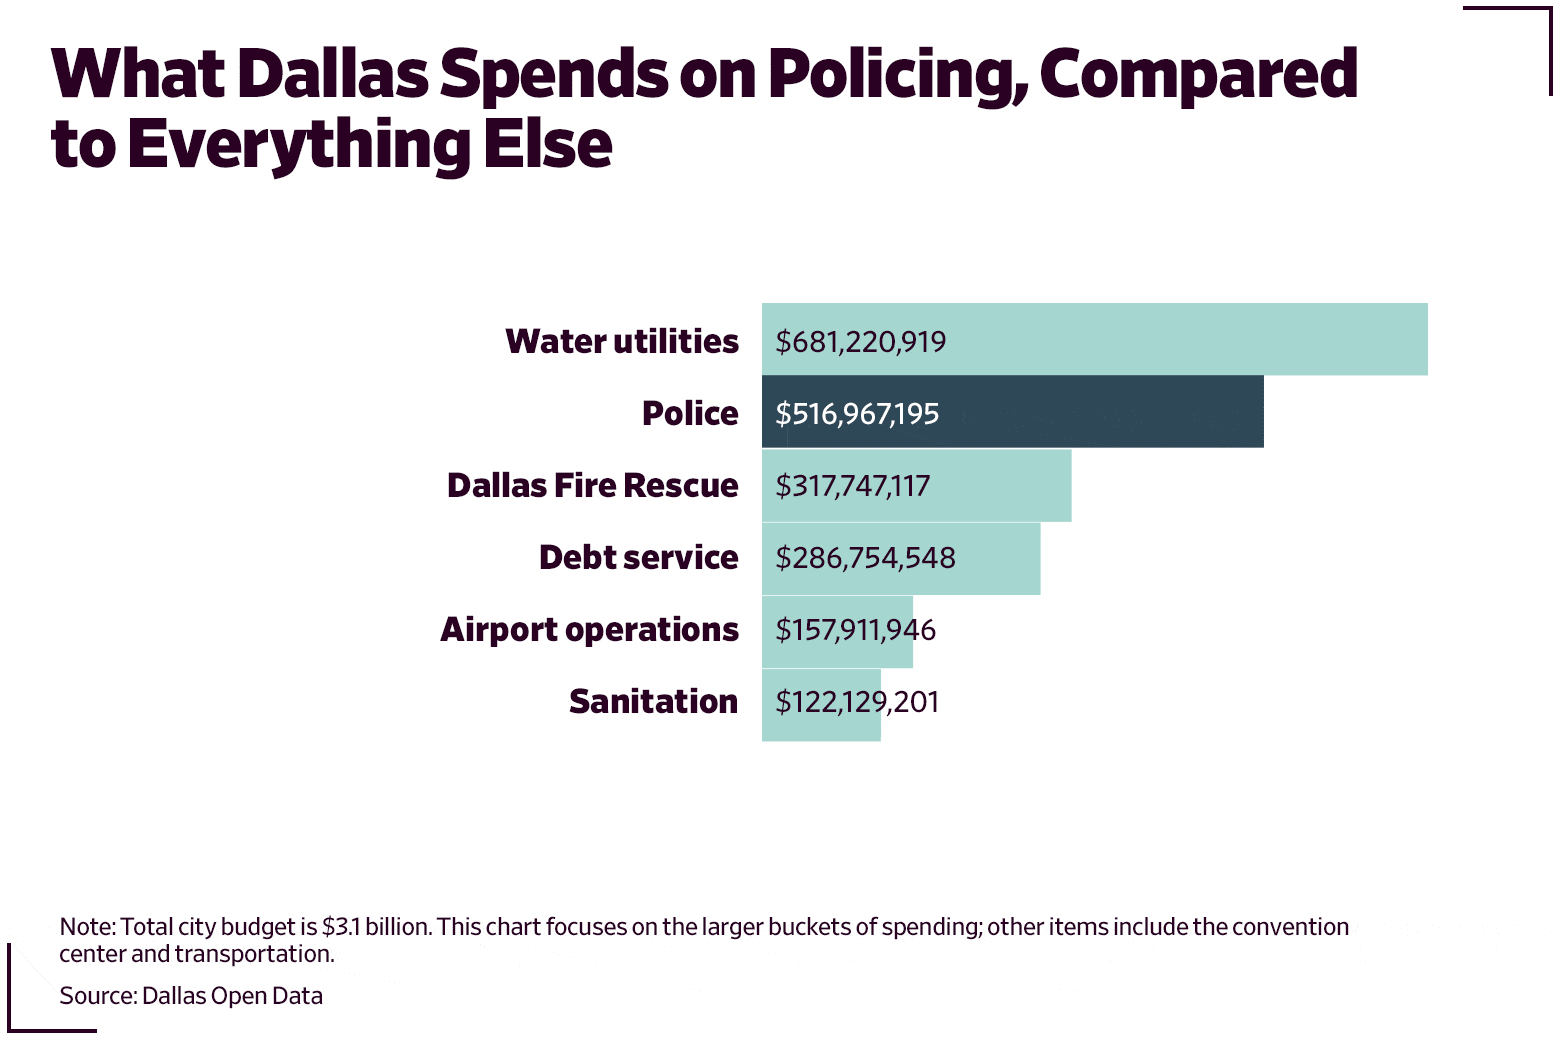 Bar graph showing what Dallas spends on policing compared with everything else